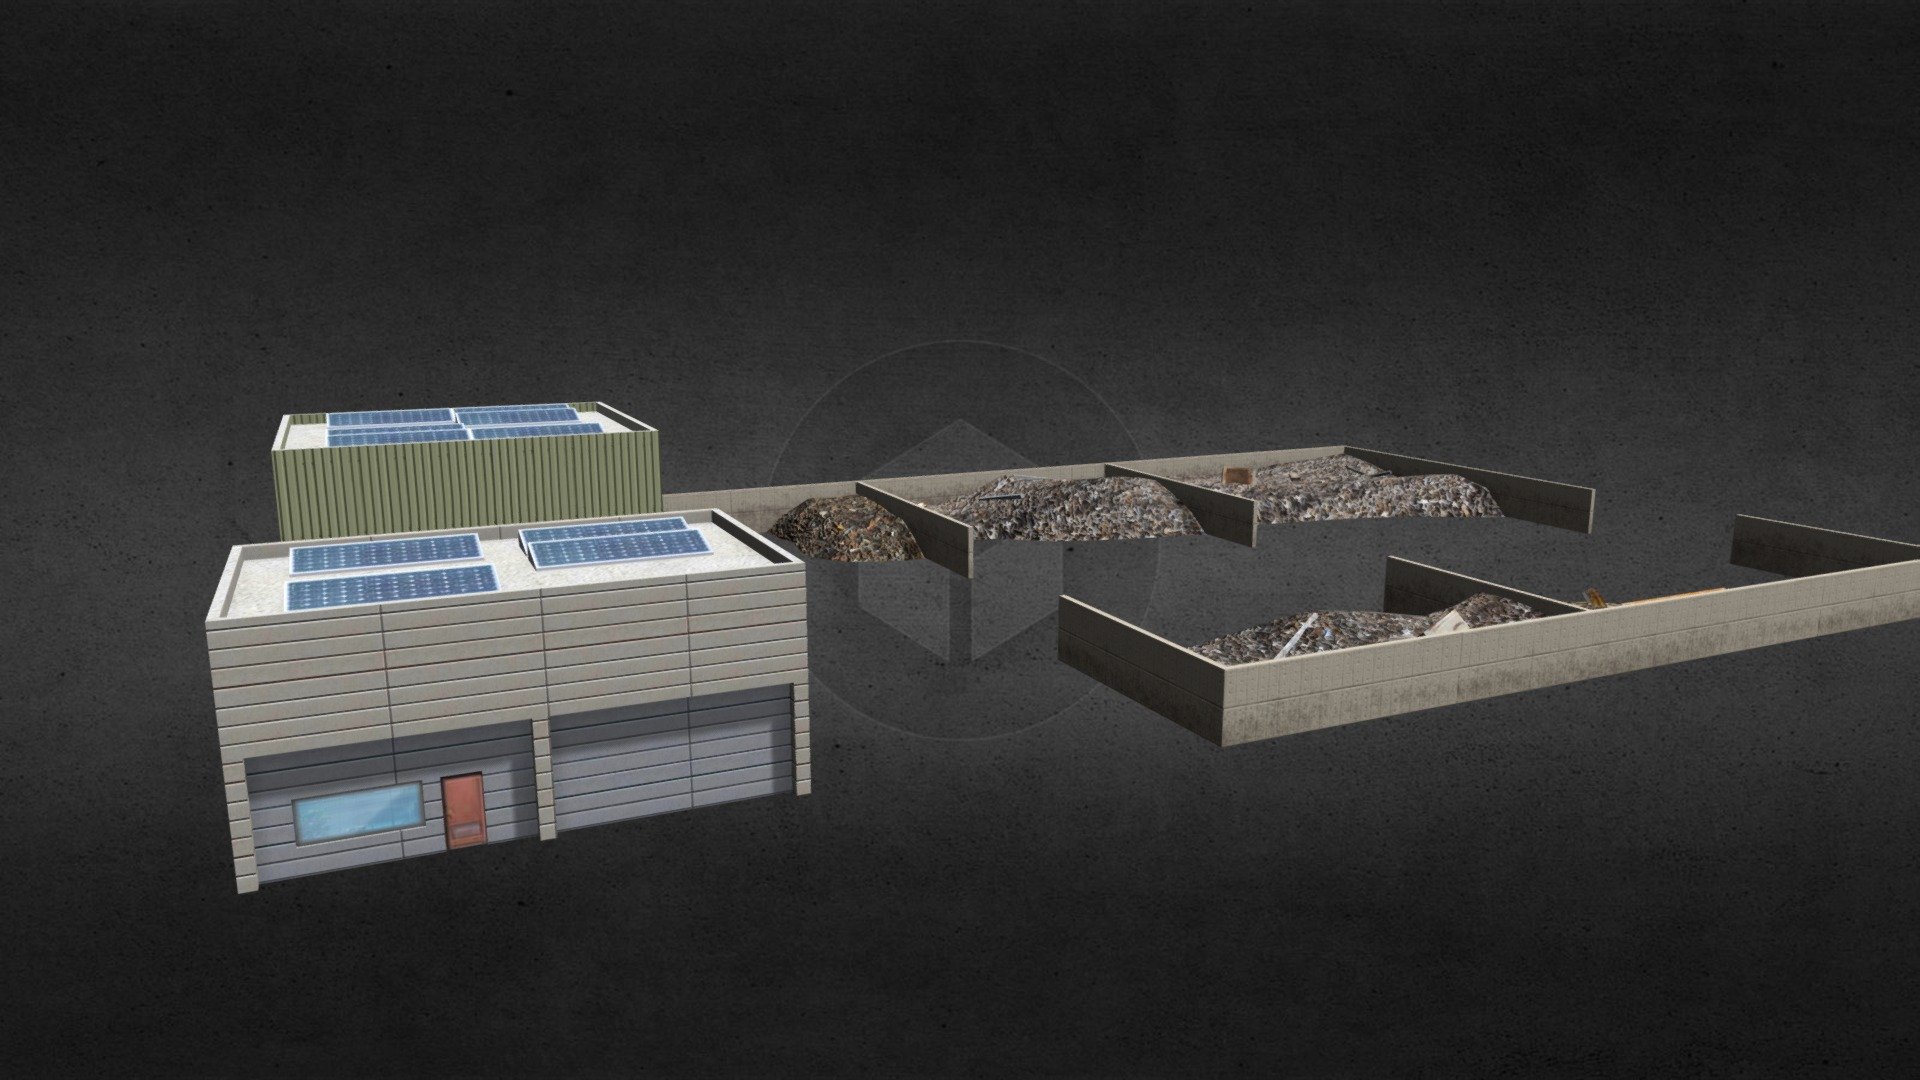 A model made for Cities: Skylines - find it here - Modular Recycling Center - Ferrous metal MRF - 3D model by Avanya 3d model